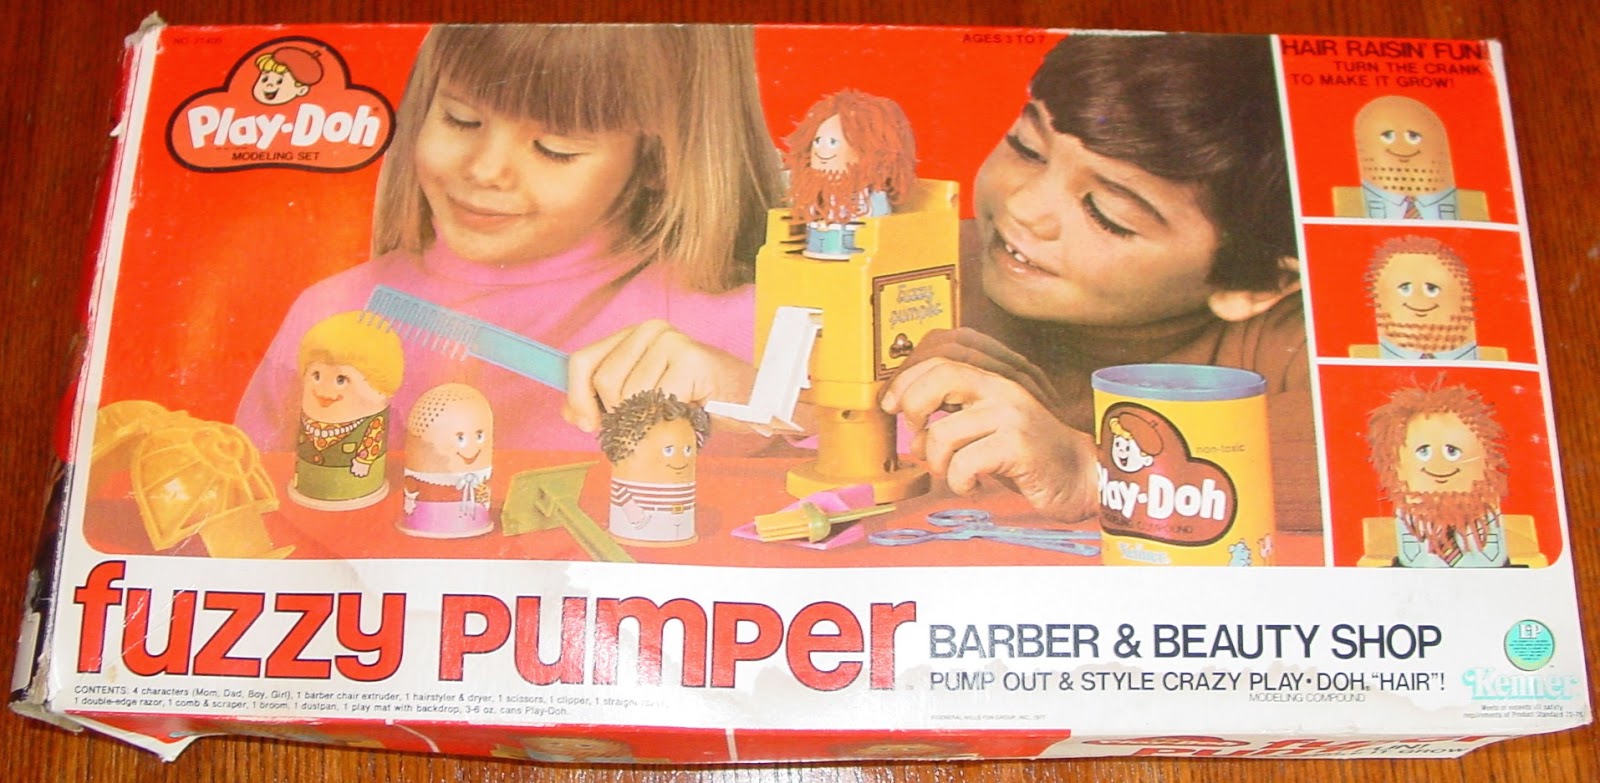 vintage toys - play doh barber shop - Ages Sto Air Raisin Fun Turn The Crank To Make It Grow PlayDoh layDoh Tuzzy Pumper Barber & Beauty Shop Pump Out & Style Crazy Playdoh.